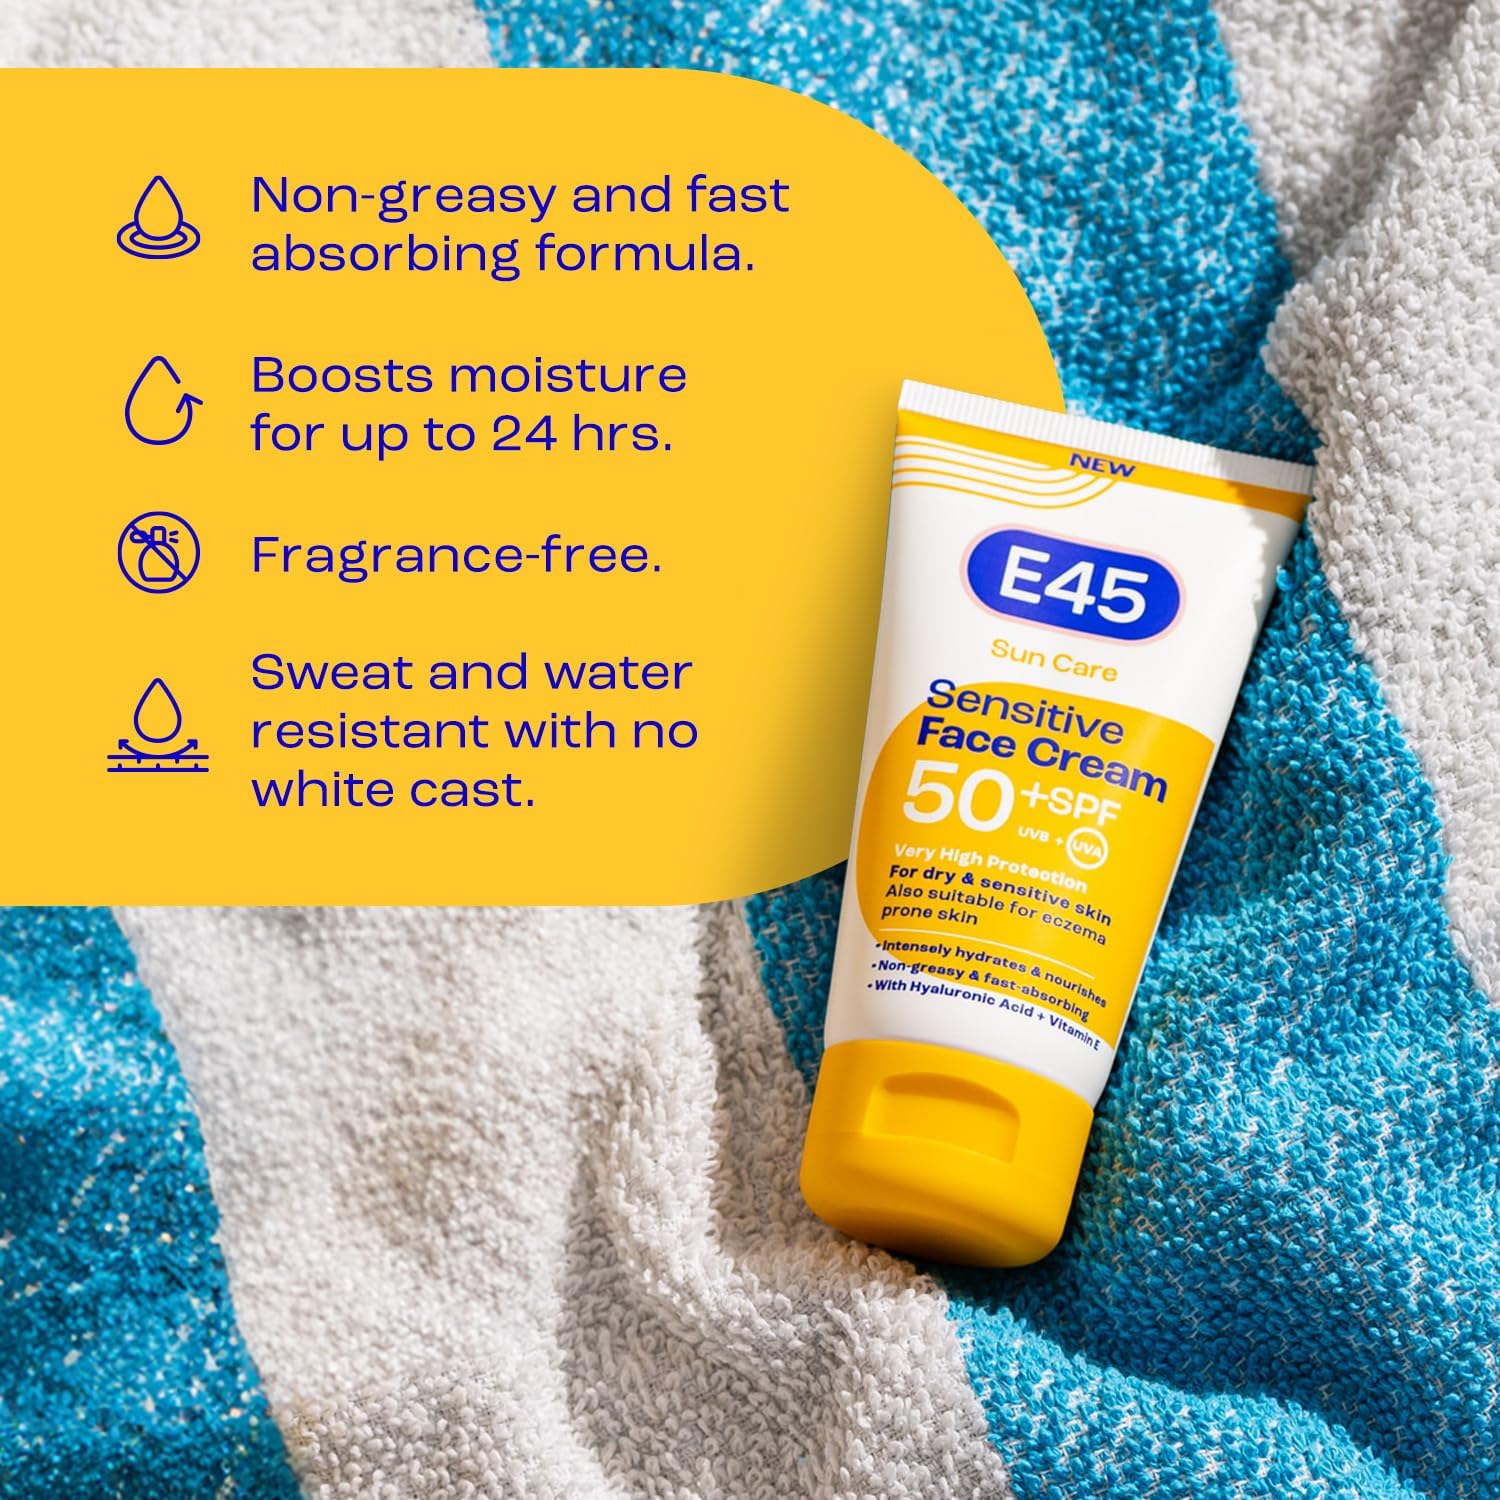 E45 SPF50+ Sensitive Sun Cream for Face with Hyaluronic Acid - UVA and UVB Protection - Fragrance-Free and Dermatologically Tested Sunscreen - Suitable For Dry, Sensitive and Eczema Prone Skin (50ml) : Amazon.co.uk: Beauty